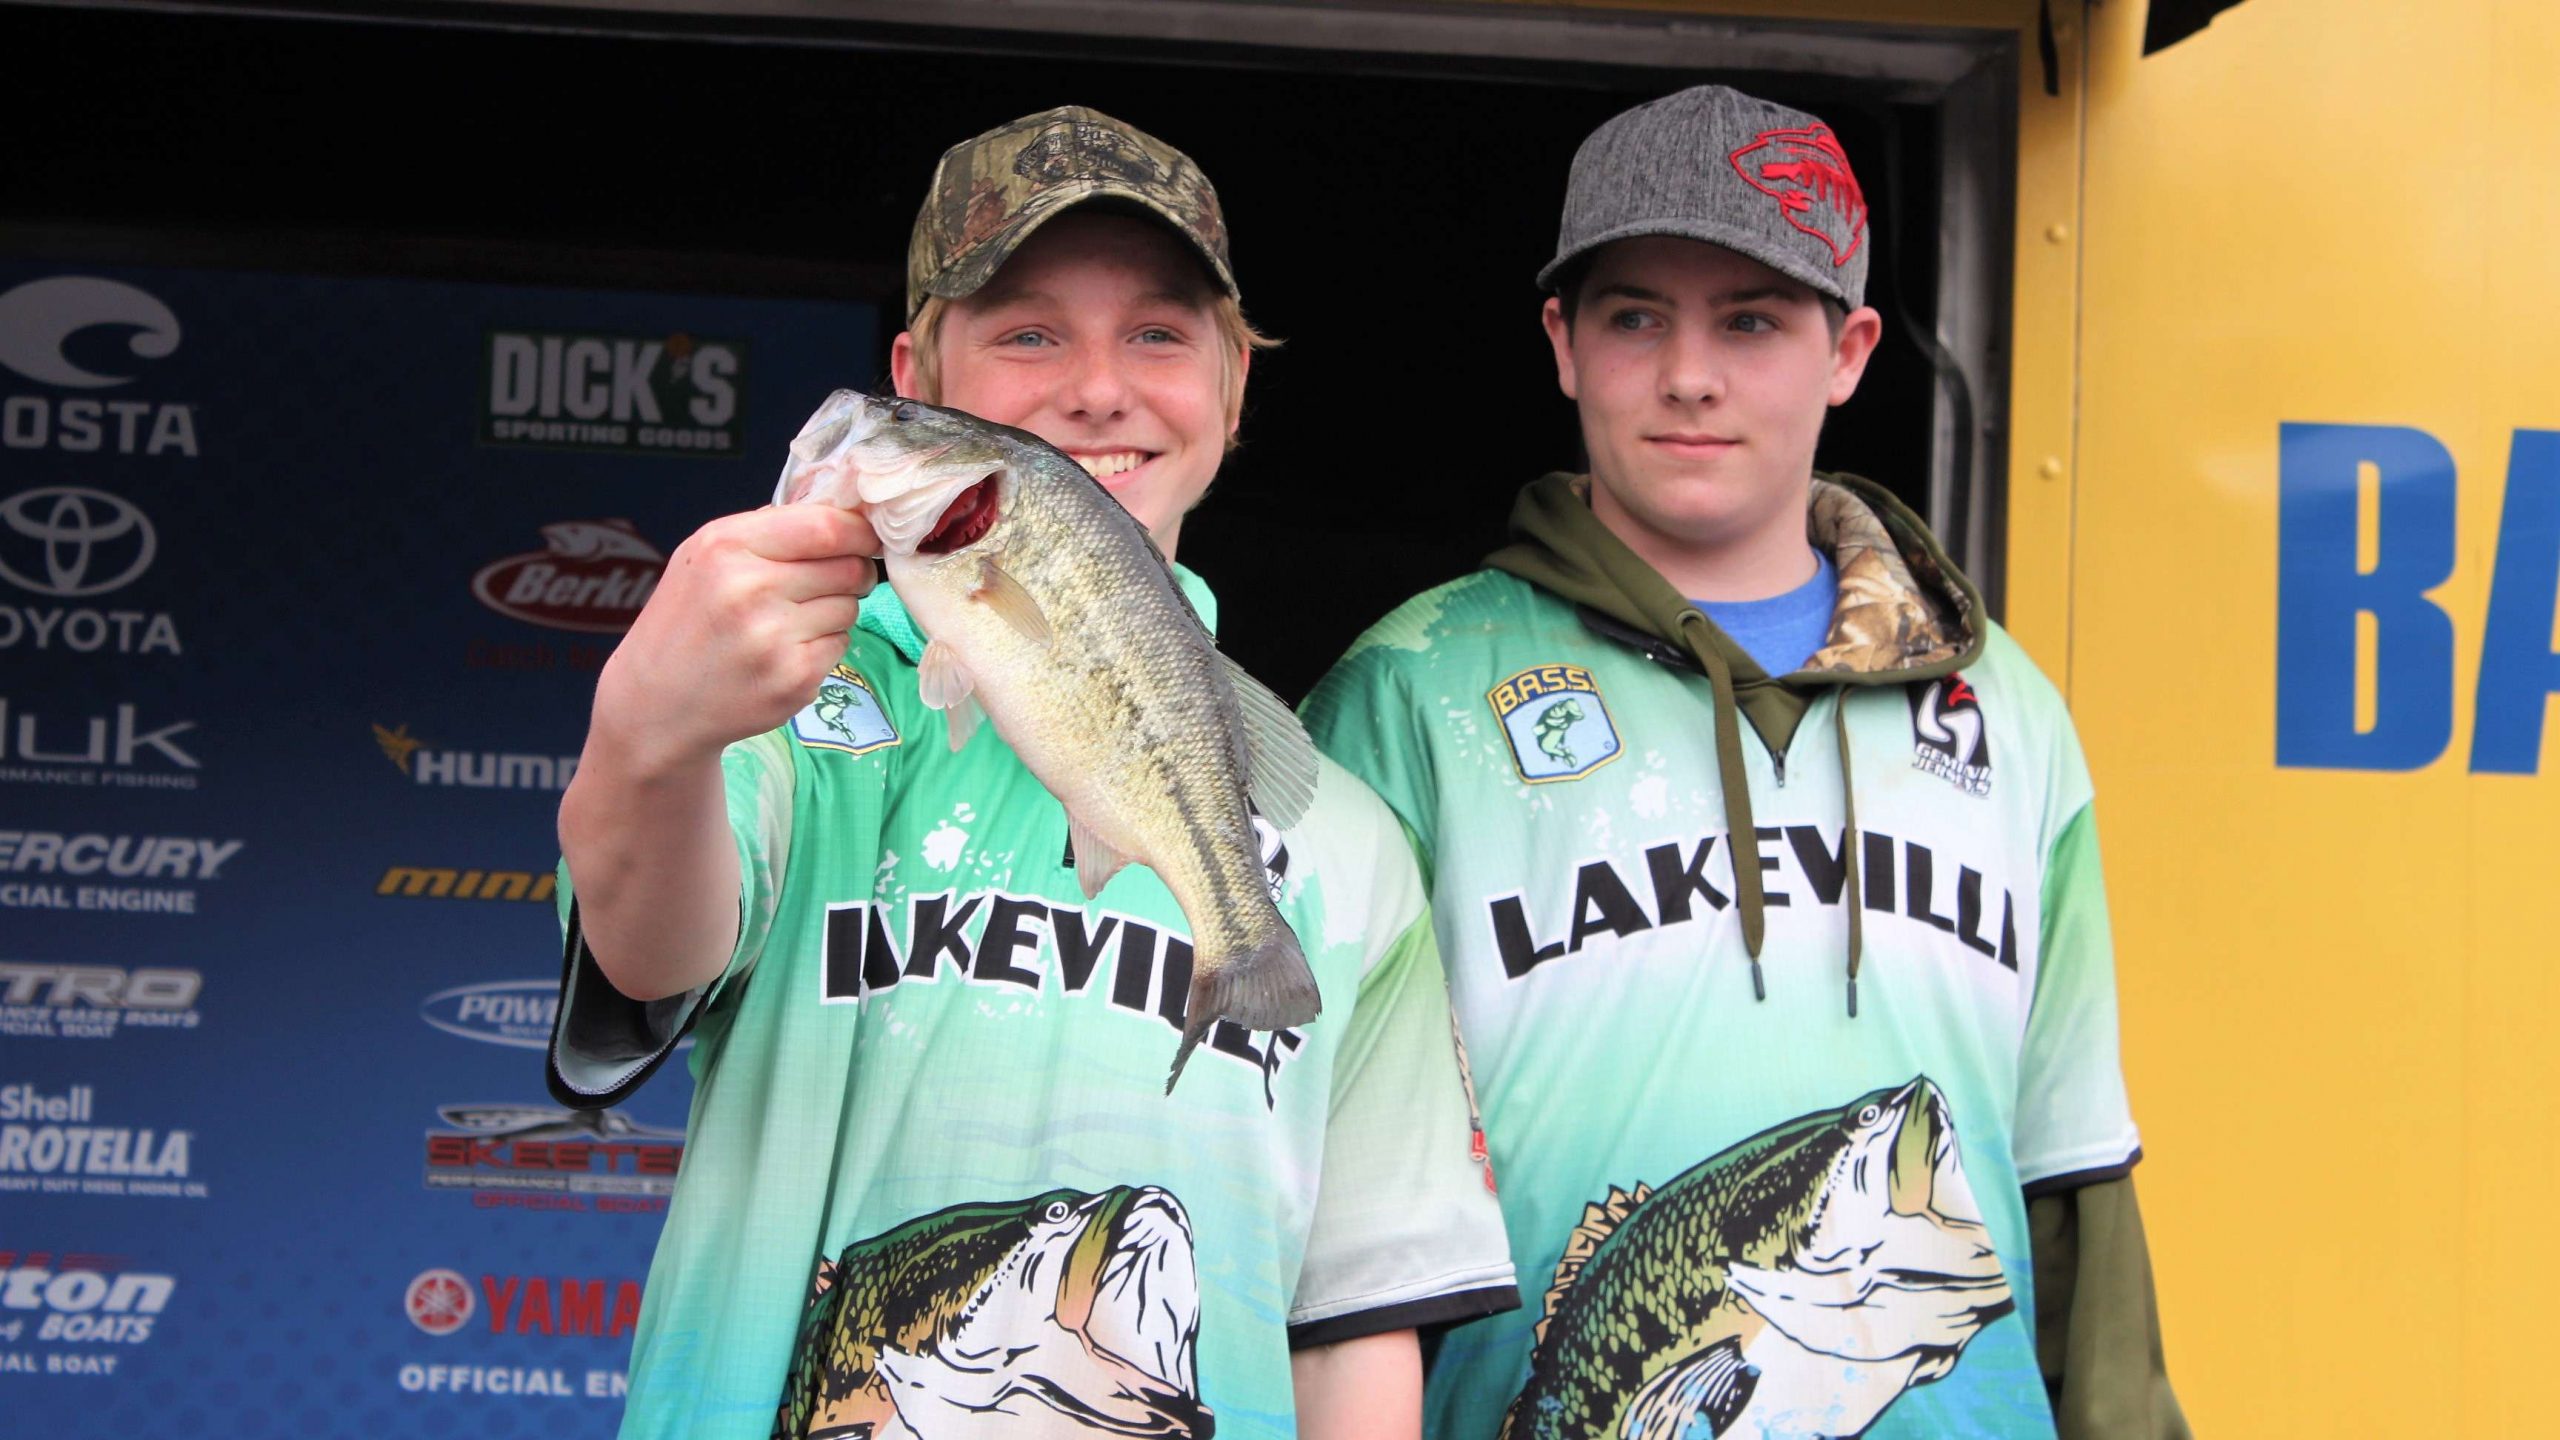 Back to the fishing, and there's the Lakeville boys who only caught one bass on Sunday. It weighed 1-9.